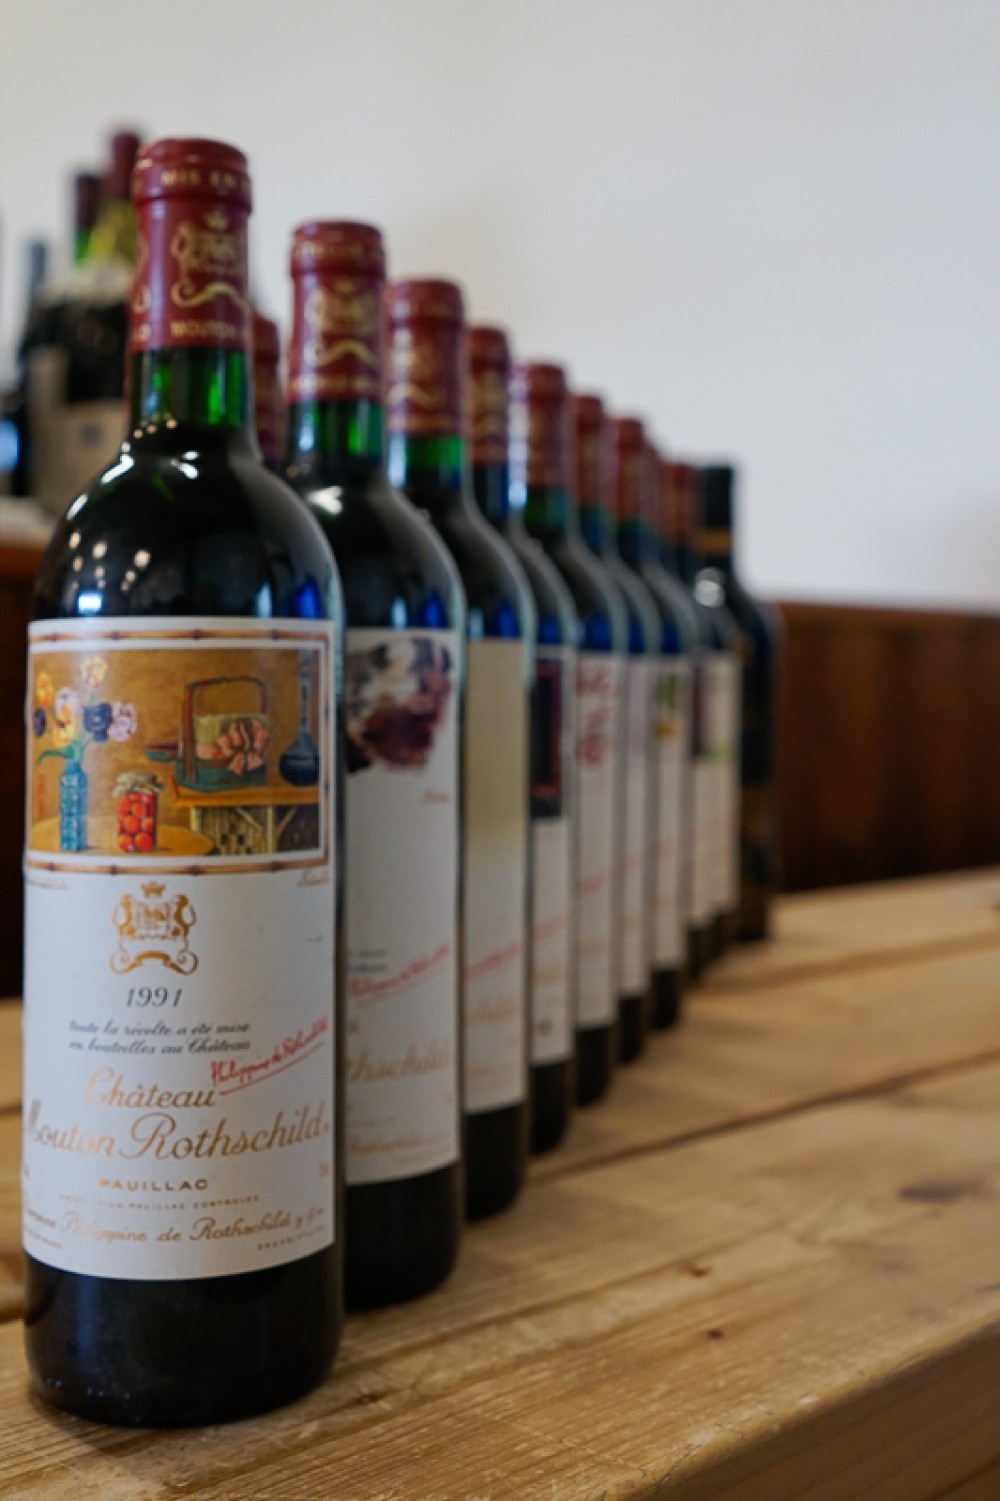 Mouton Rothschild - verticals and collectibles